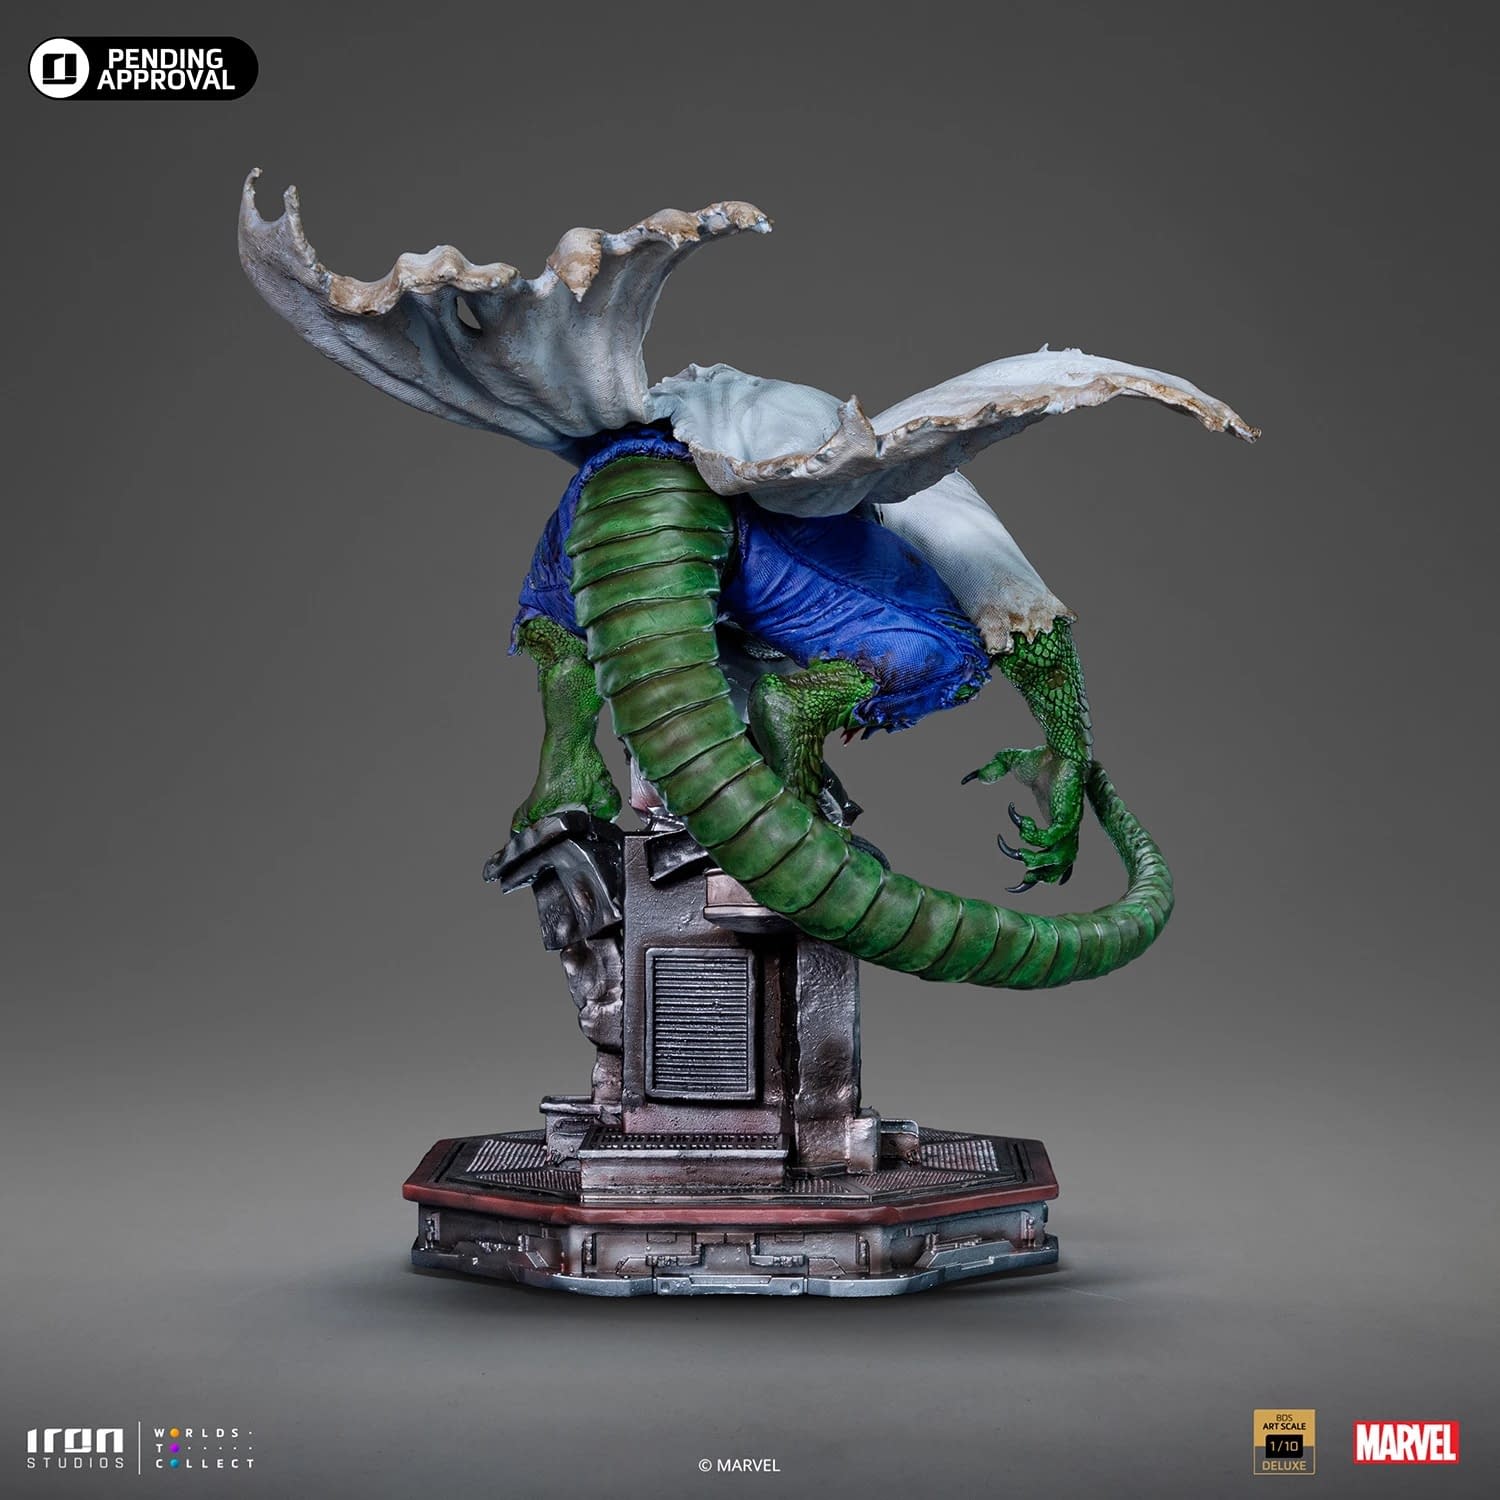 Spider-Man vs. Villains The Lizard Diorama Revealed by Iron Studios3